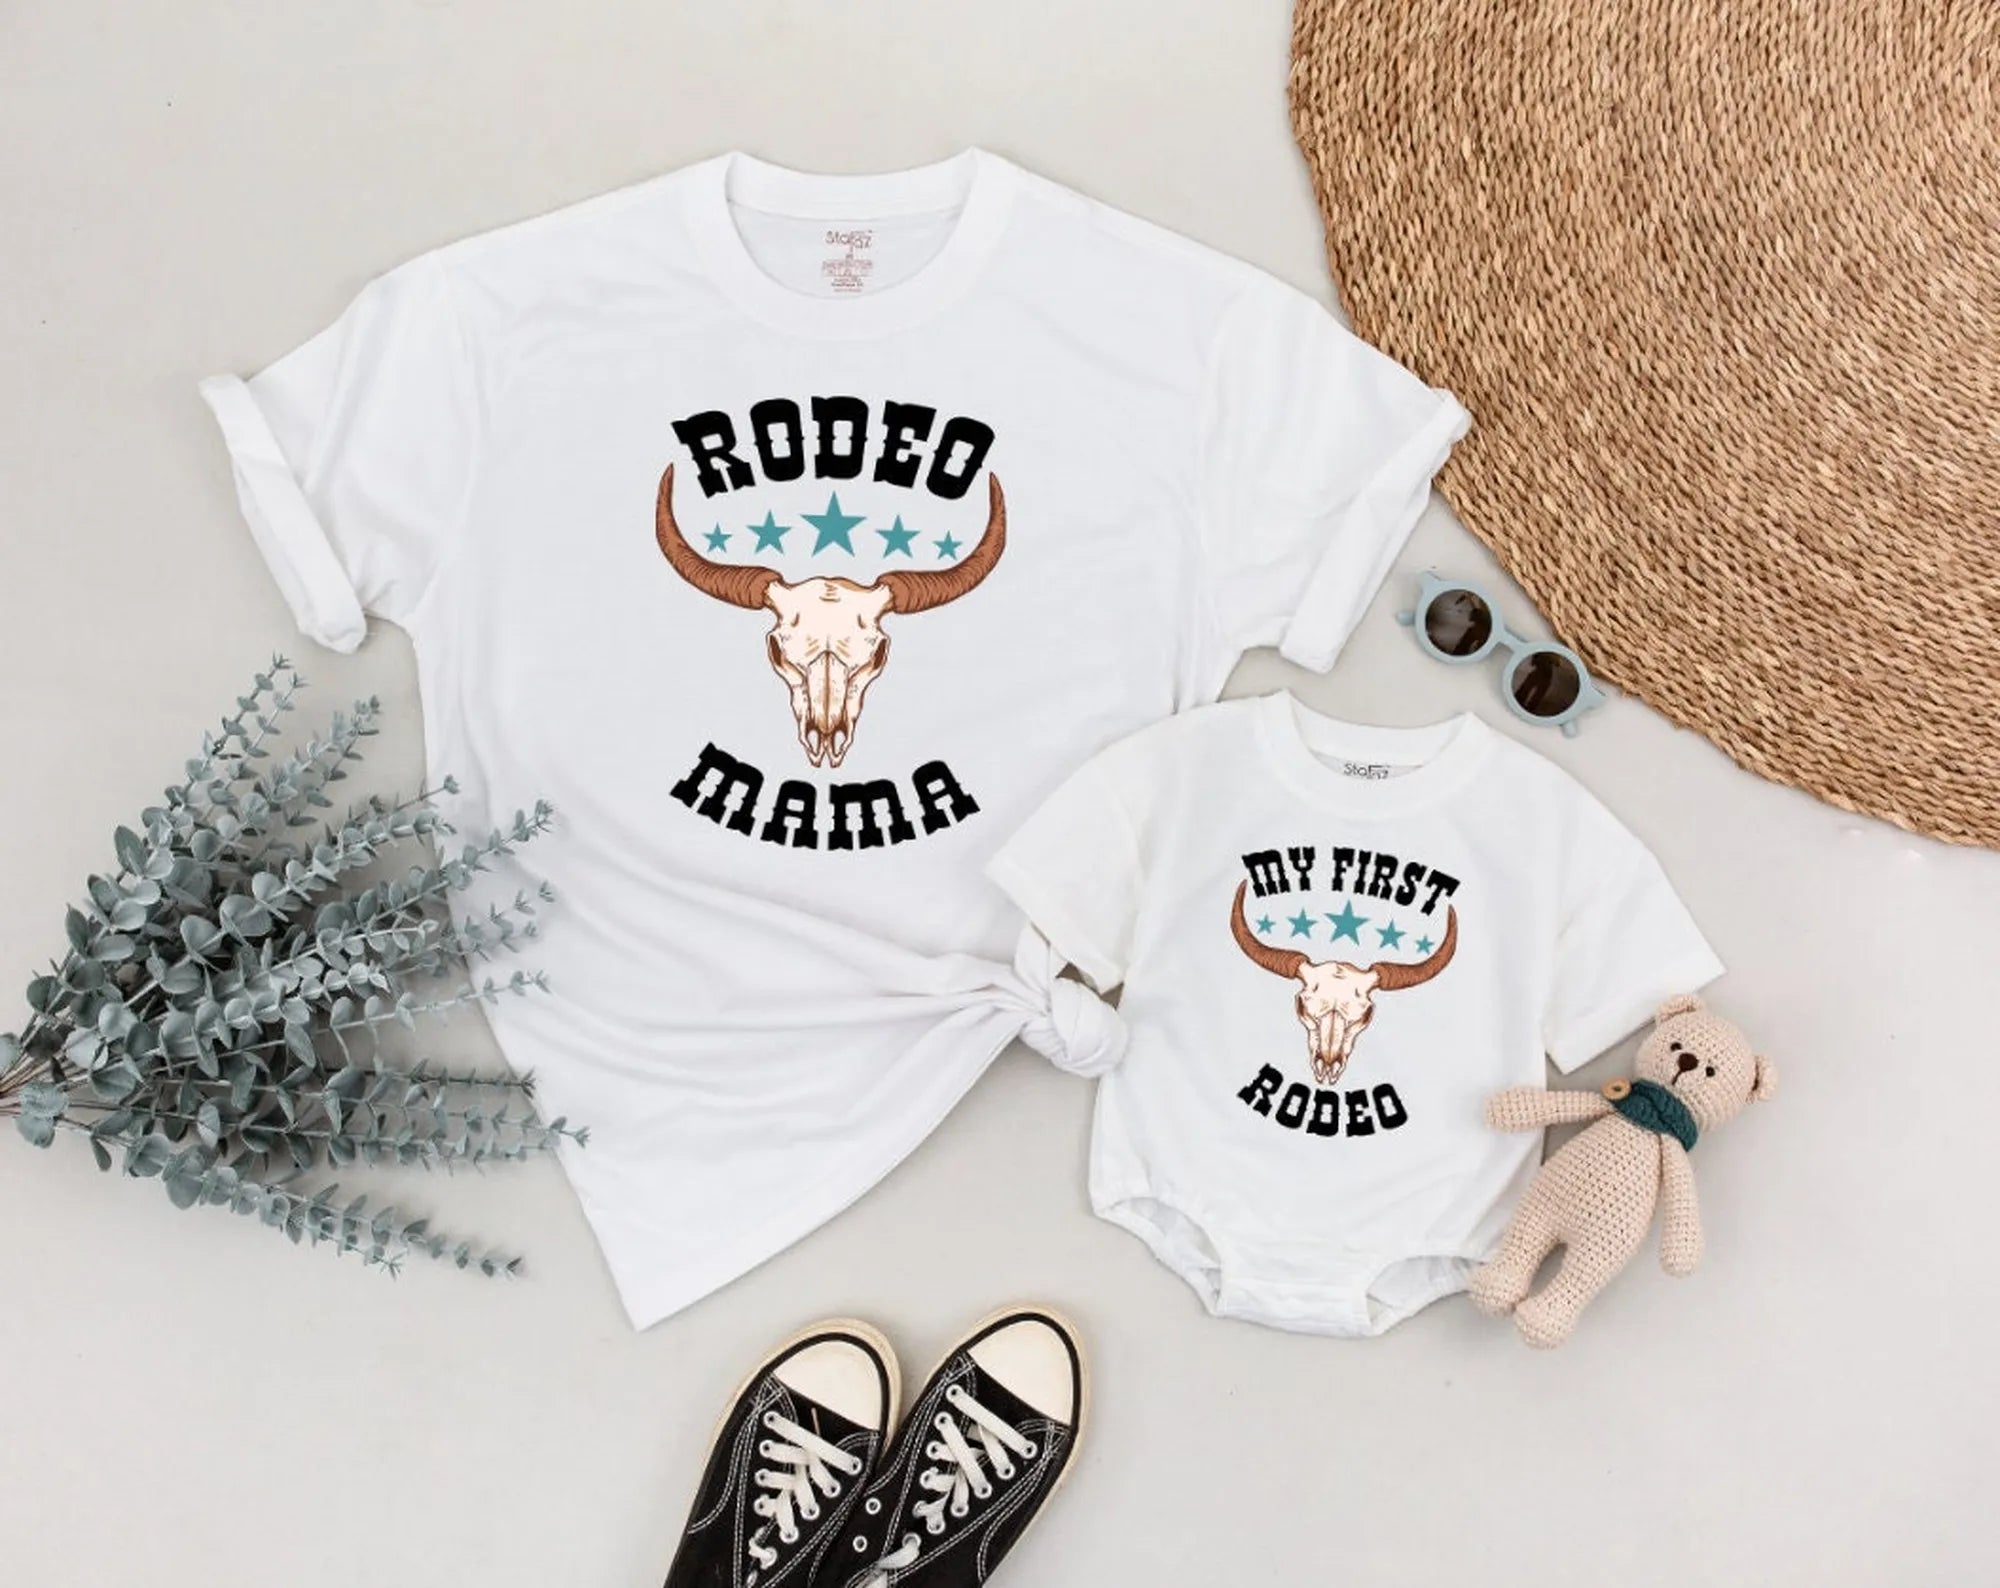 My First Rodeo Romper Matching: Retro Western Birthday Outfit!